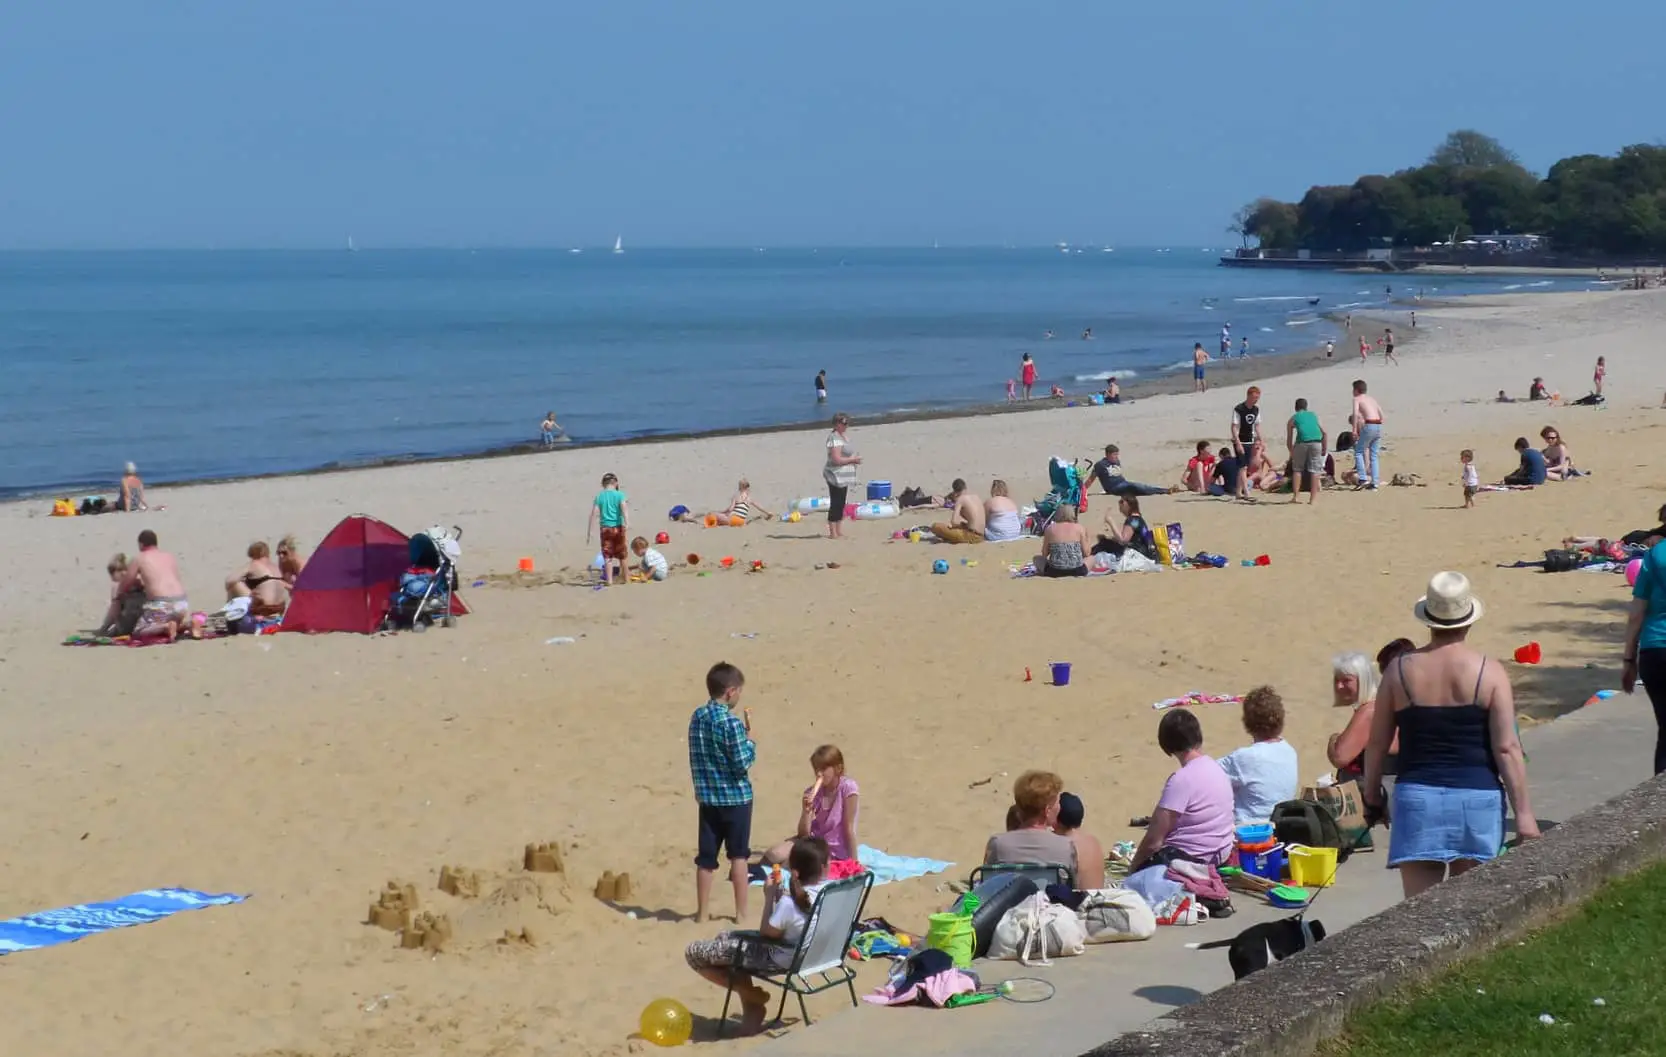 Ryde Beach with lots of beach-goers